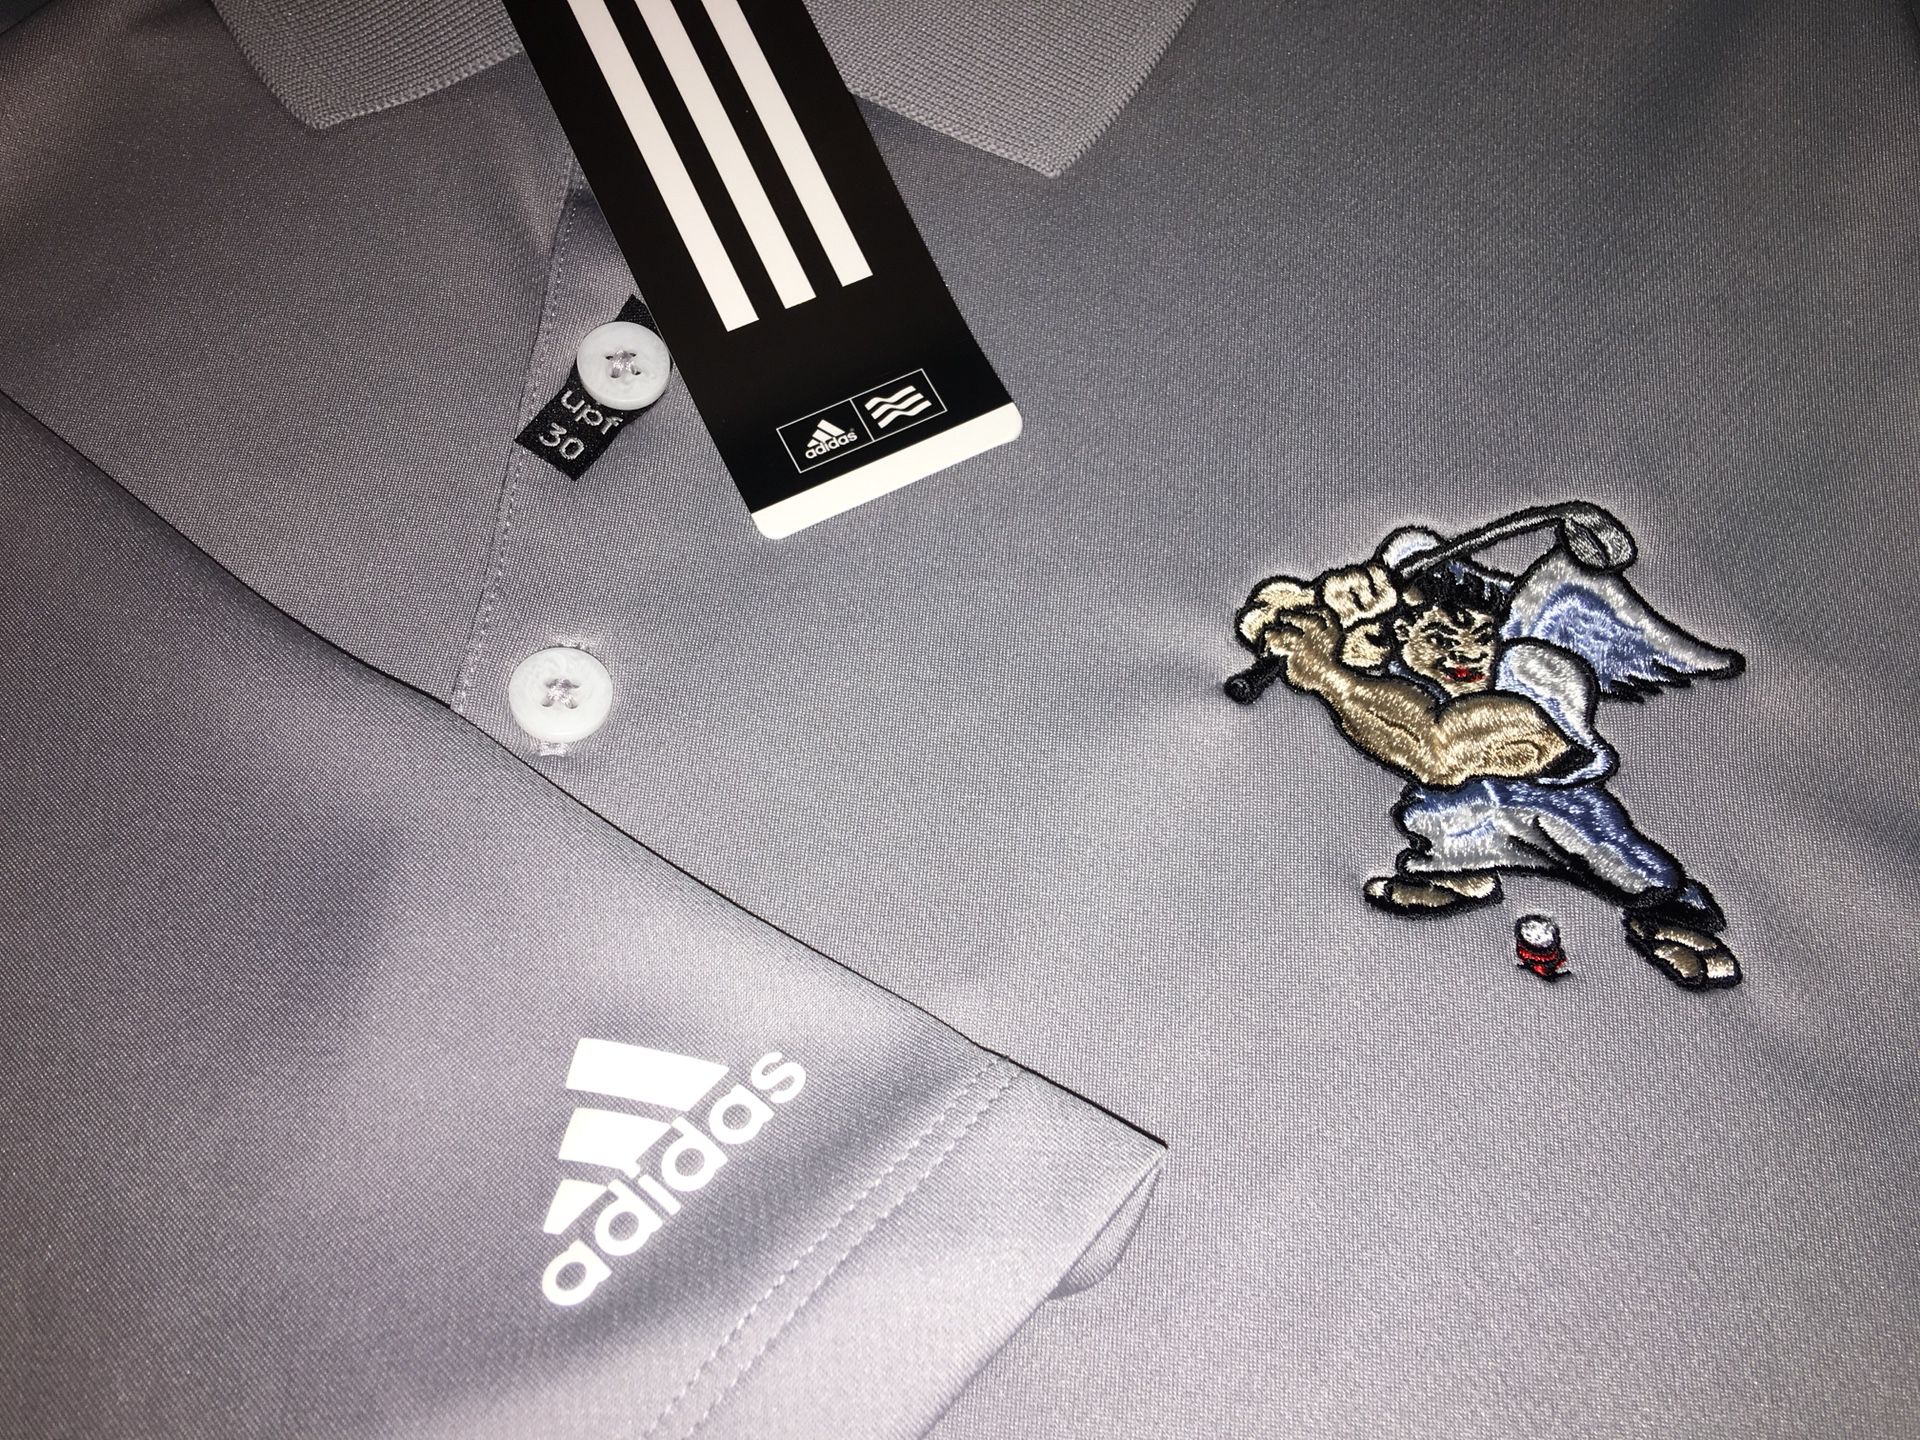 Adidas Golf Shirt, New with Tag, Extra Extra Large, $10